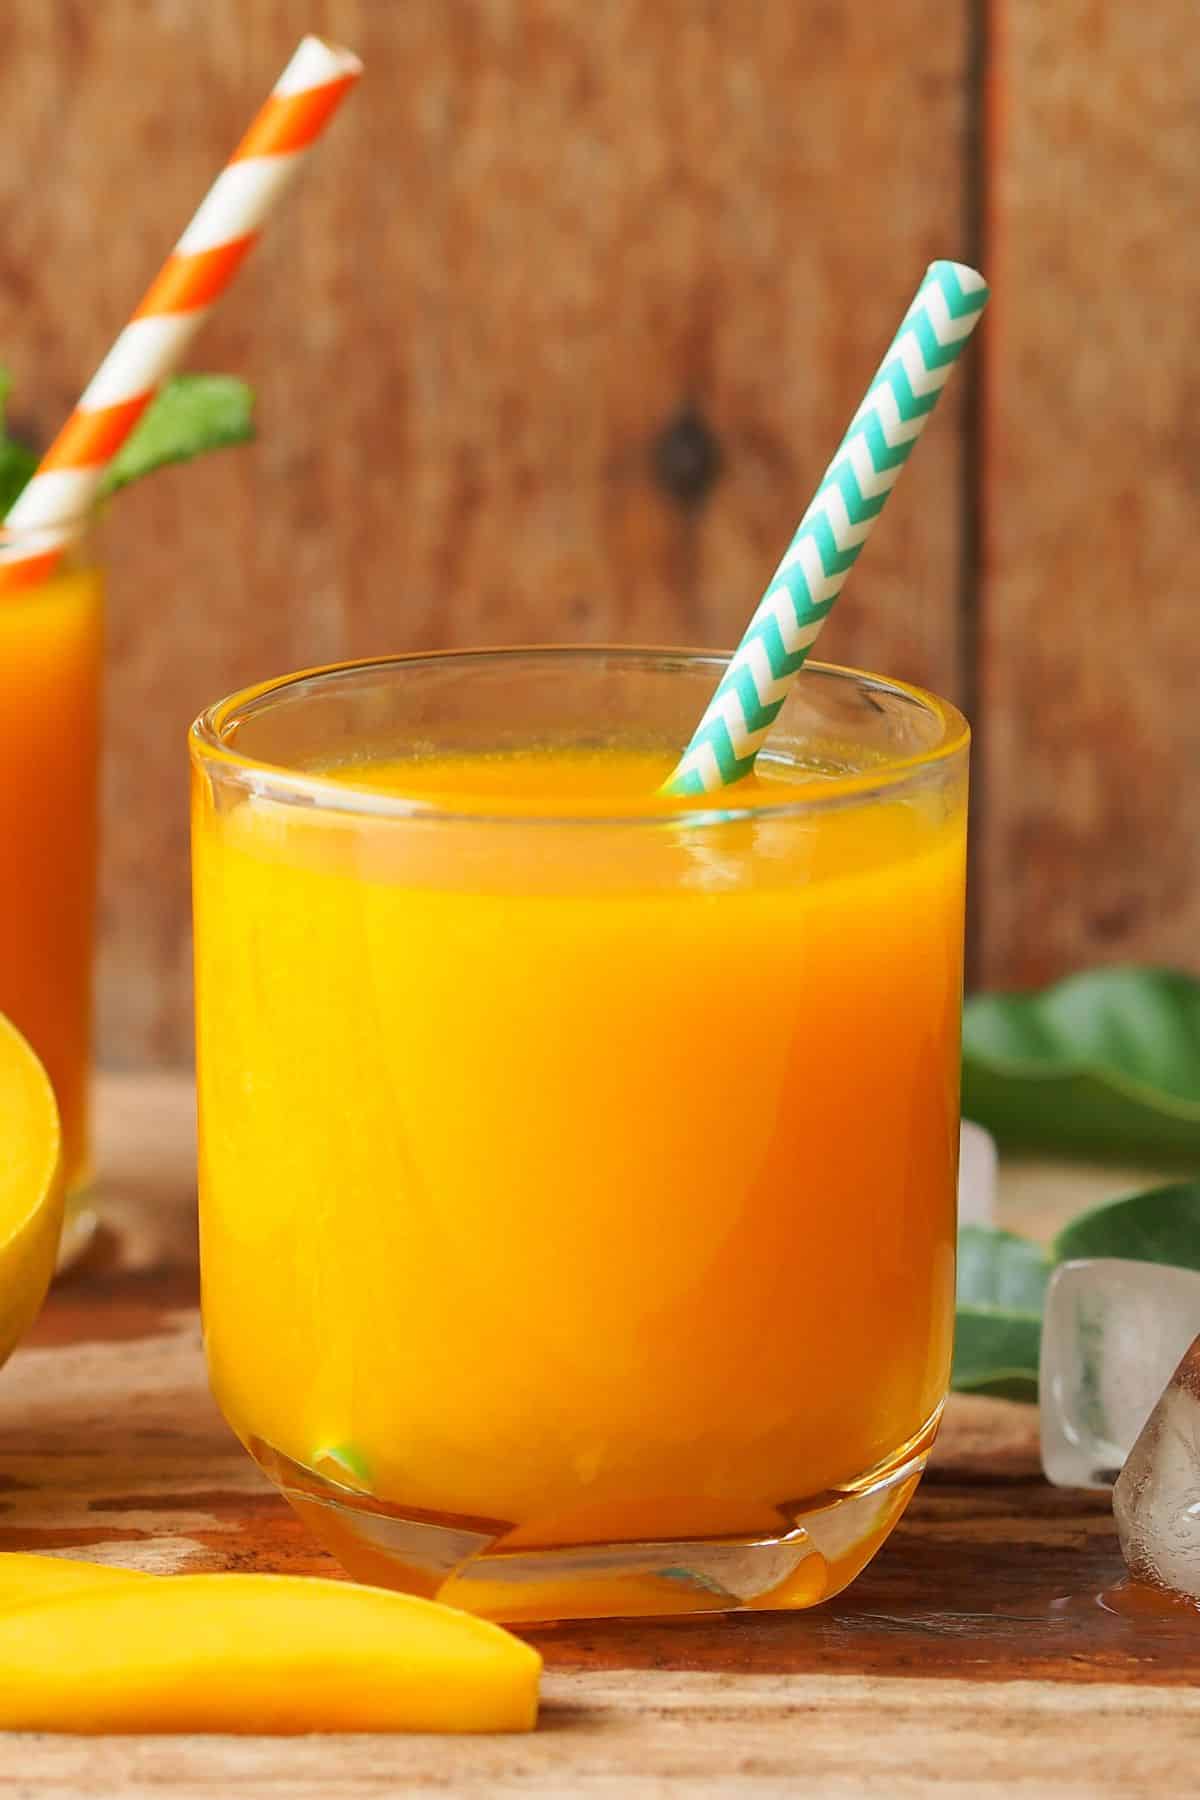 A short glass of mango carrot juice with a striped straw.